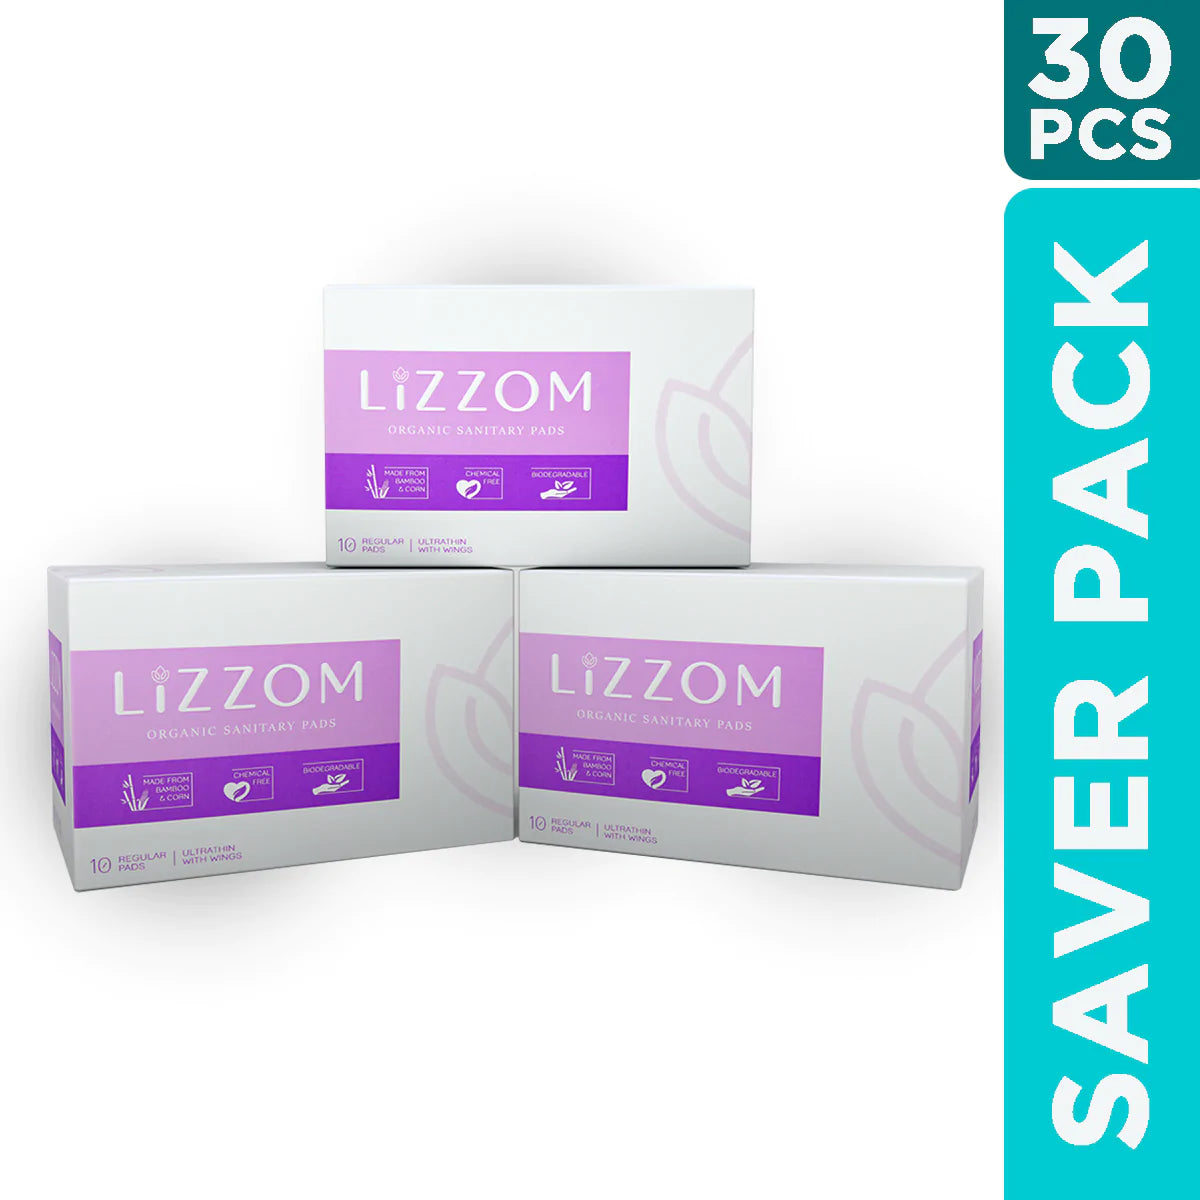 LiZZOM Ultra Thin Regular Pads With Wings (30 pc) - Pack Of 3